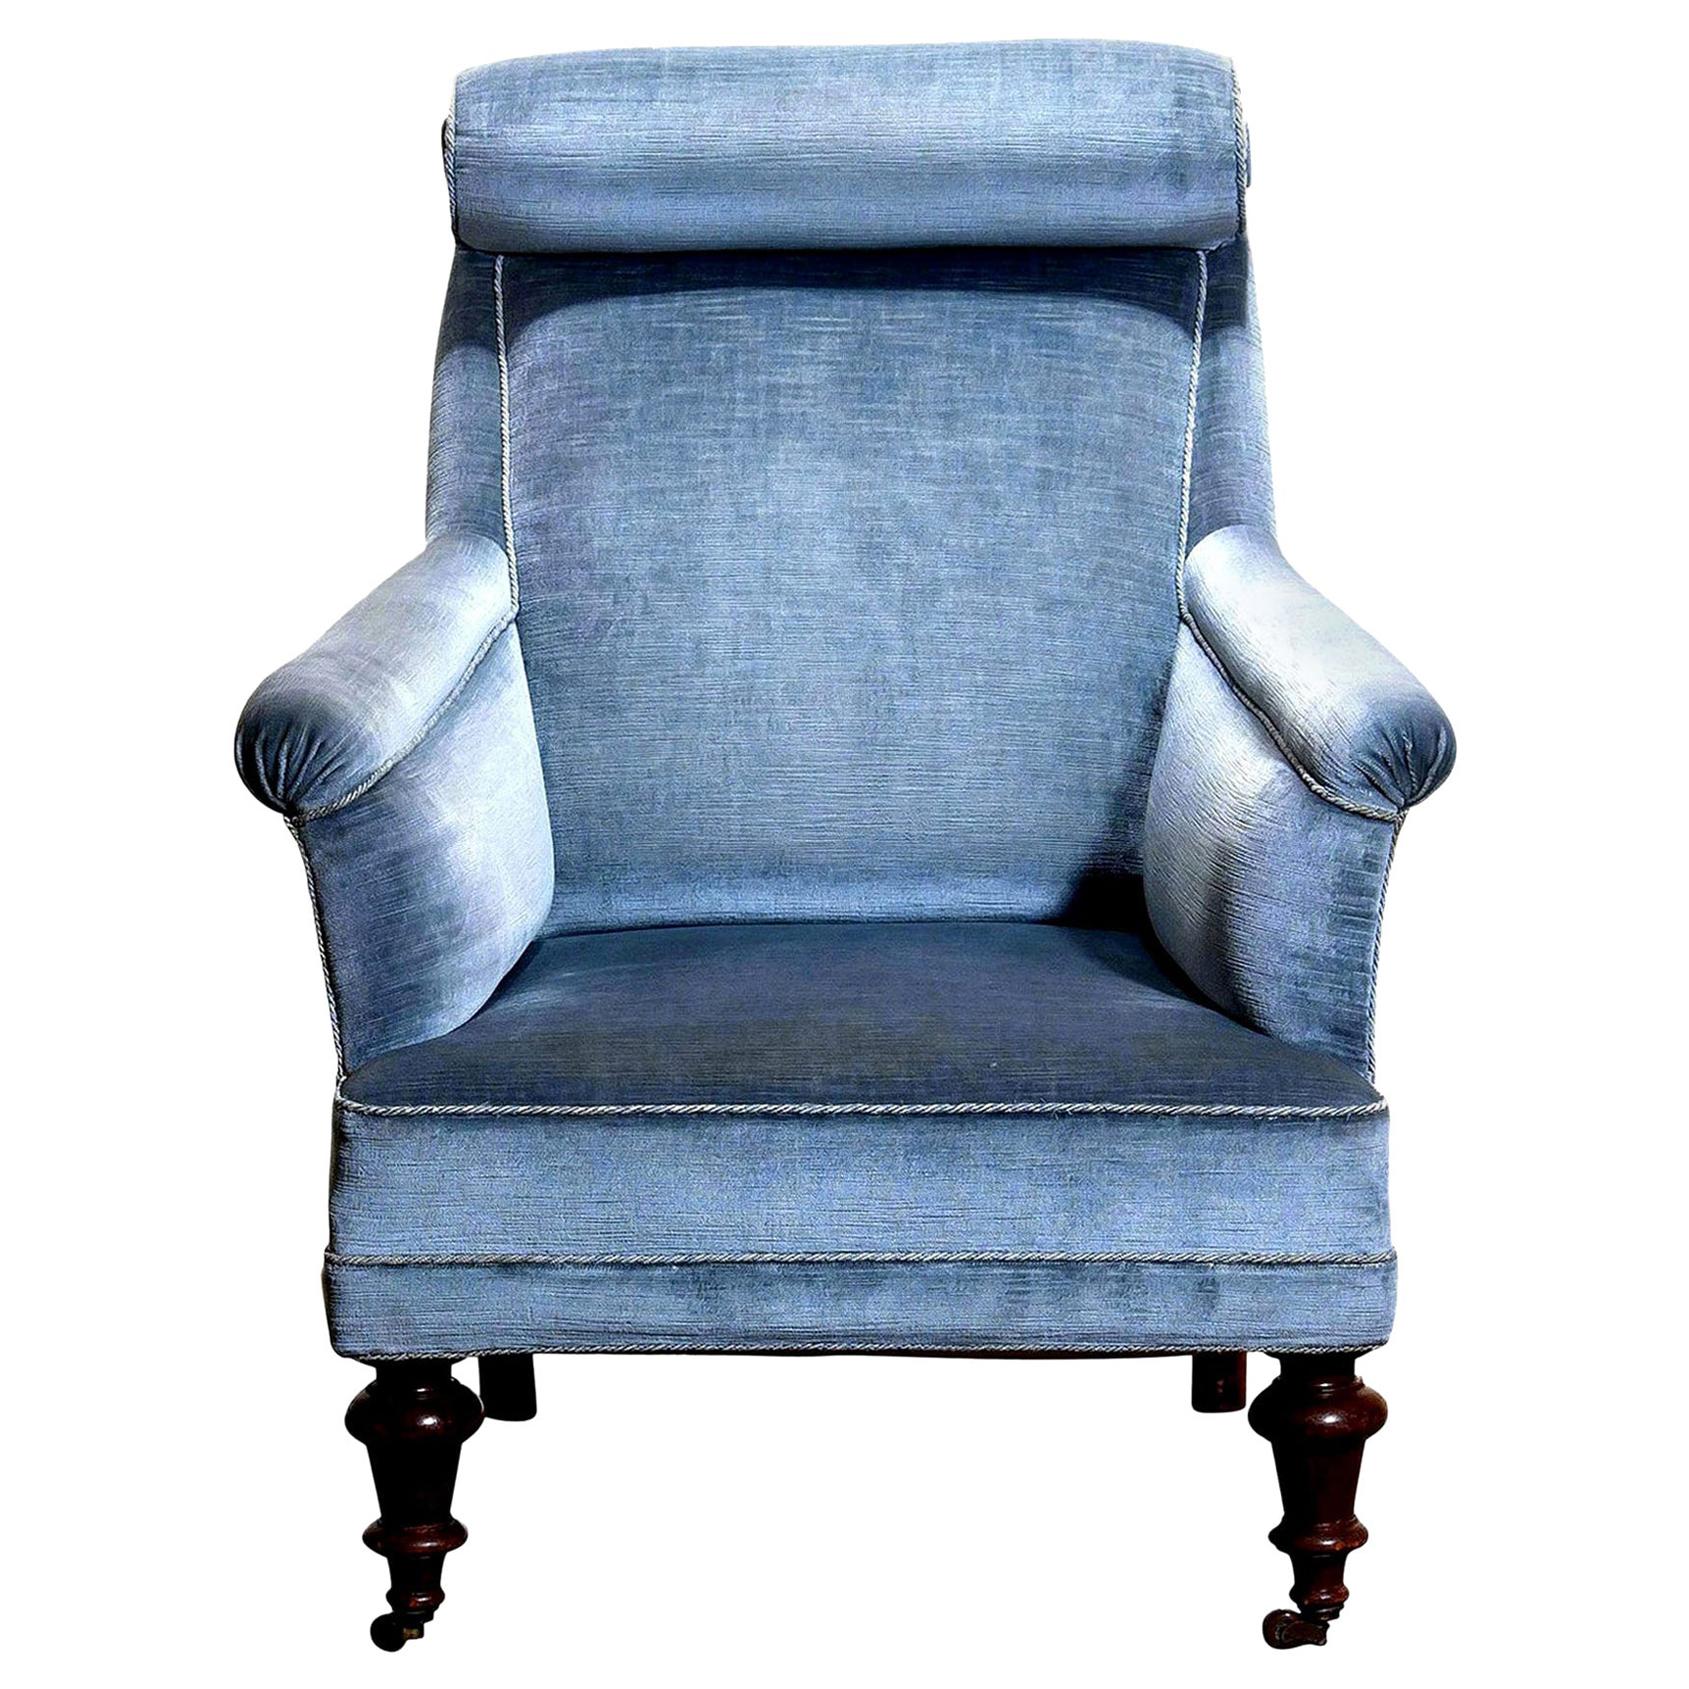 Rare and extremely comfortable and beautiful bergère or lounge chair in Dorothy Draper style from the turn to the 20th century.
Upholstered in ice blue velvet and in good condition.

Period: 1900.